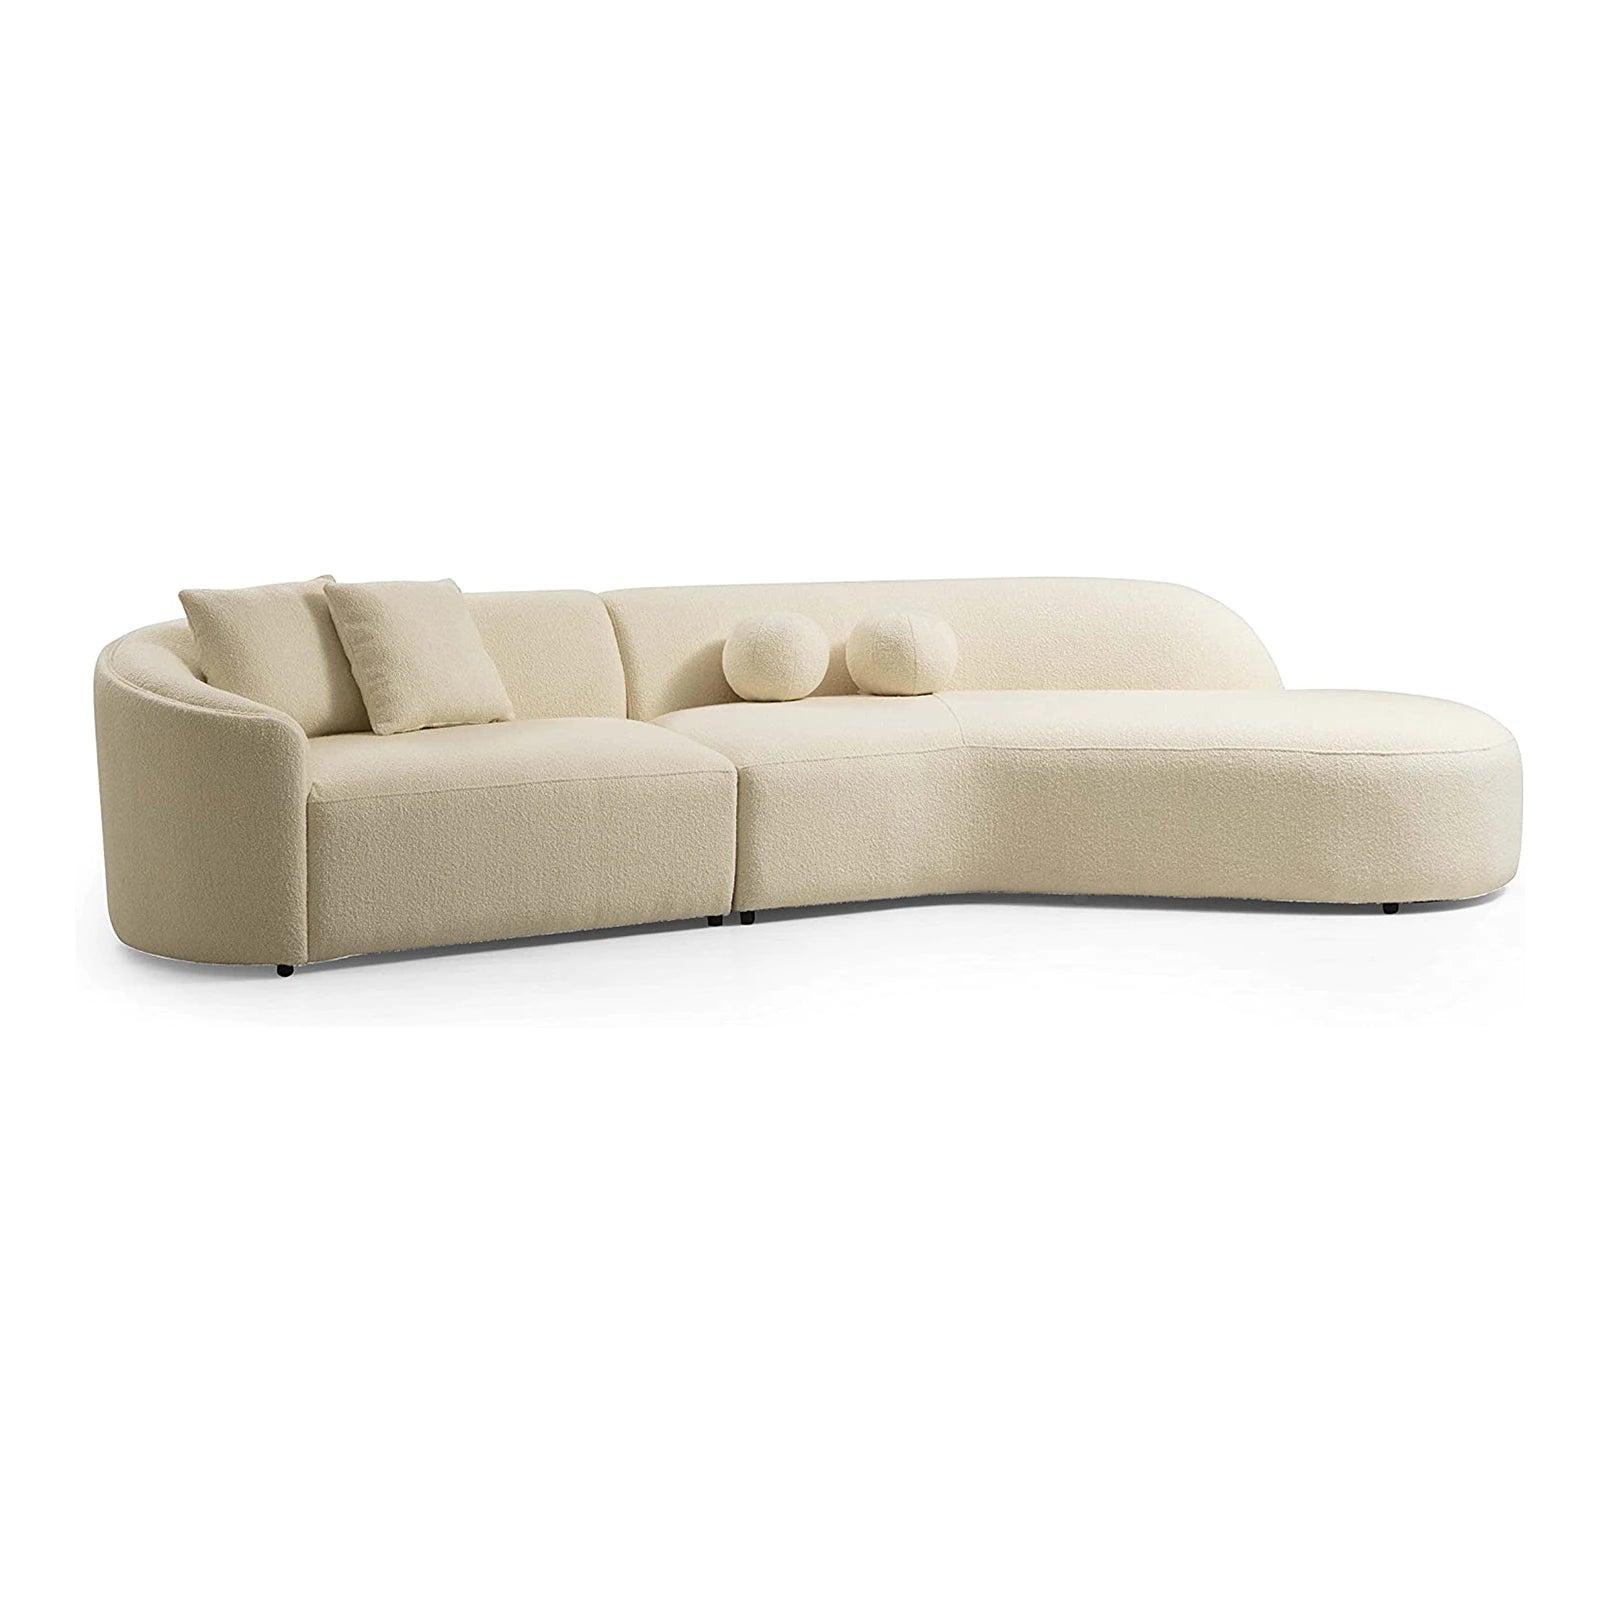 Curved Luxury Modern Sectional Lounge Chaise